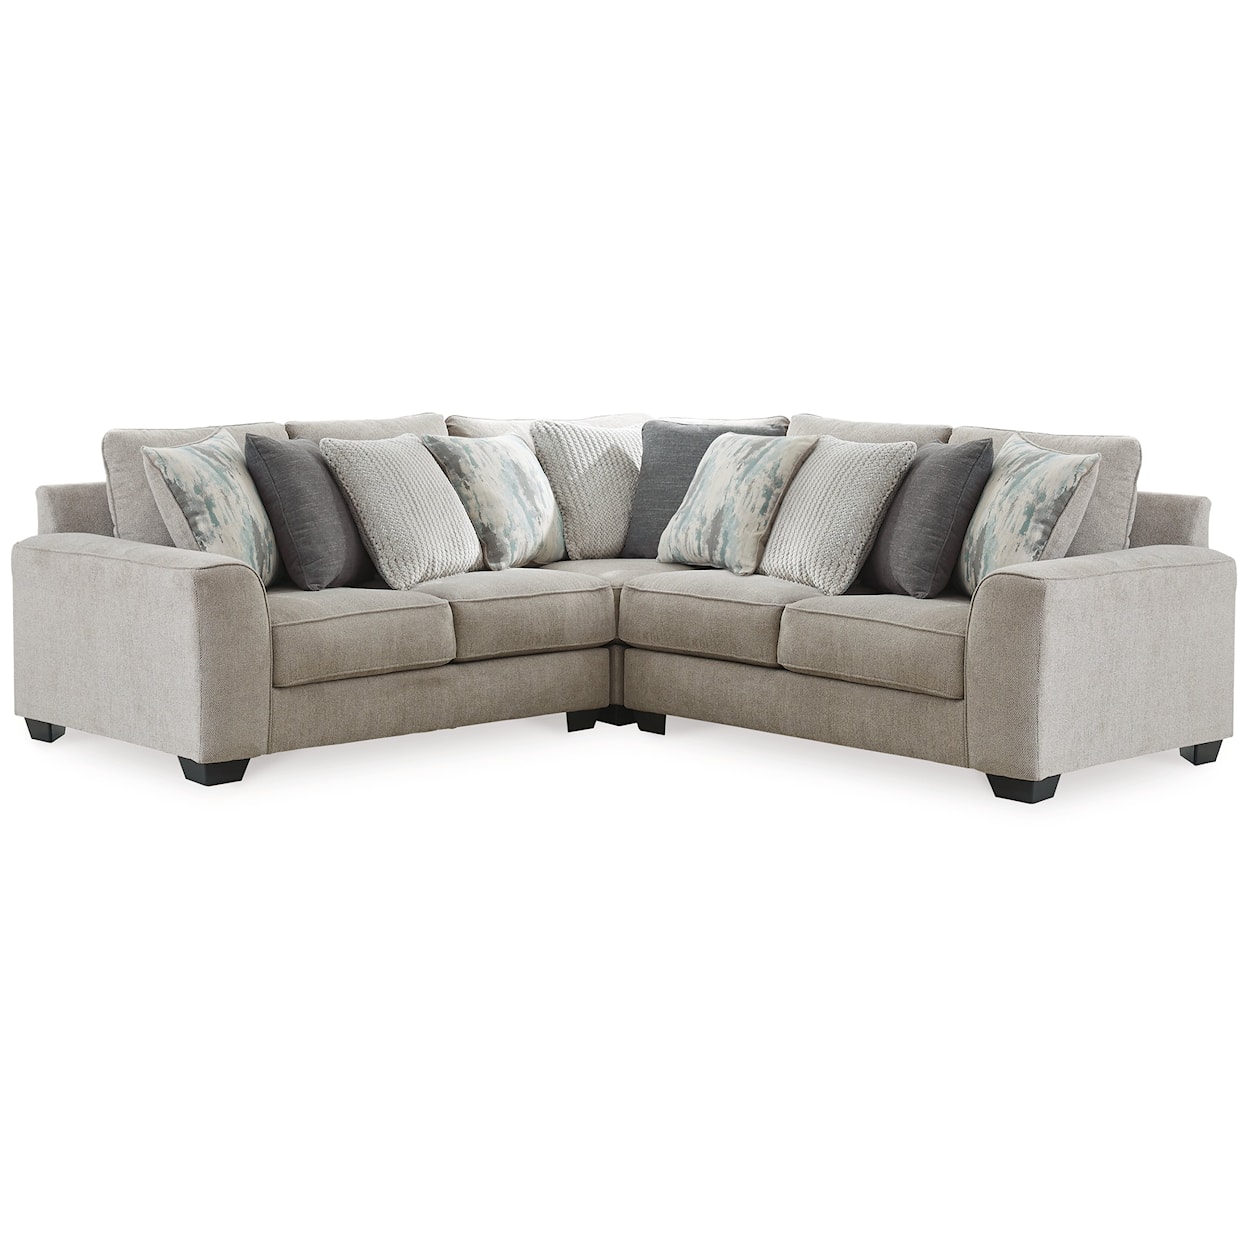 Benchcraft Ardsley 3-Piece Sectional